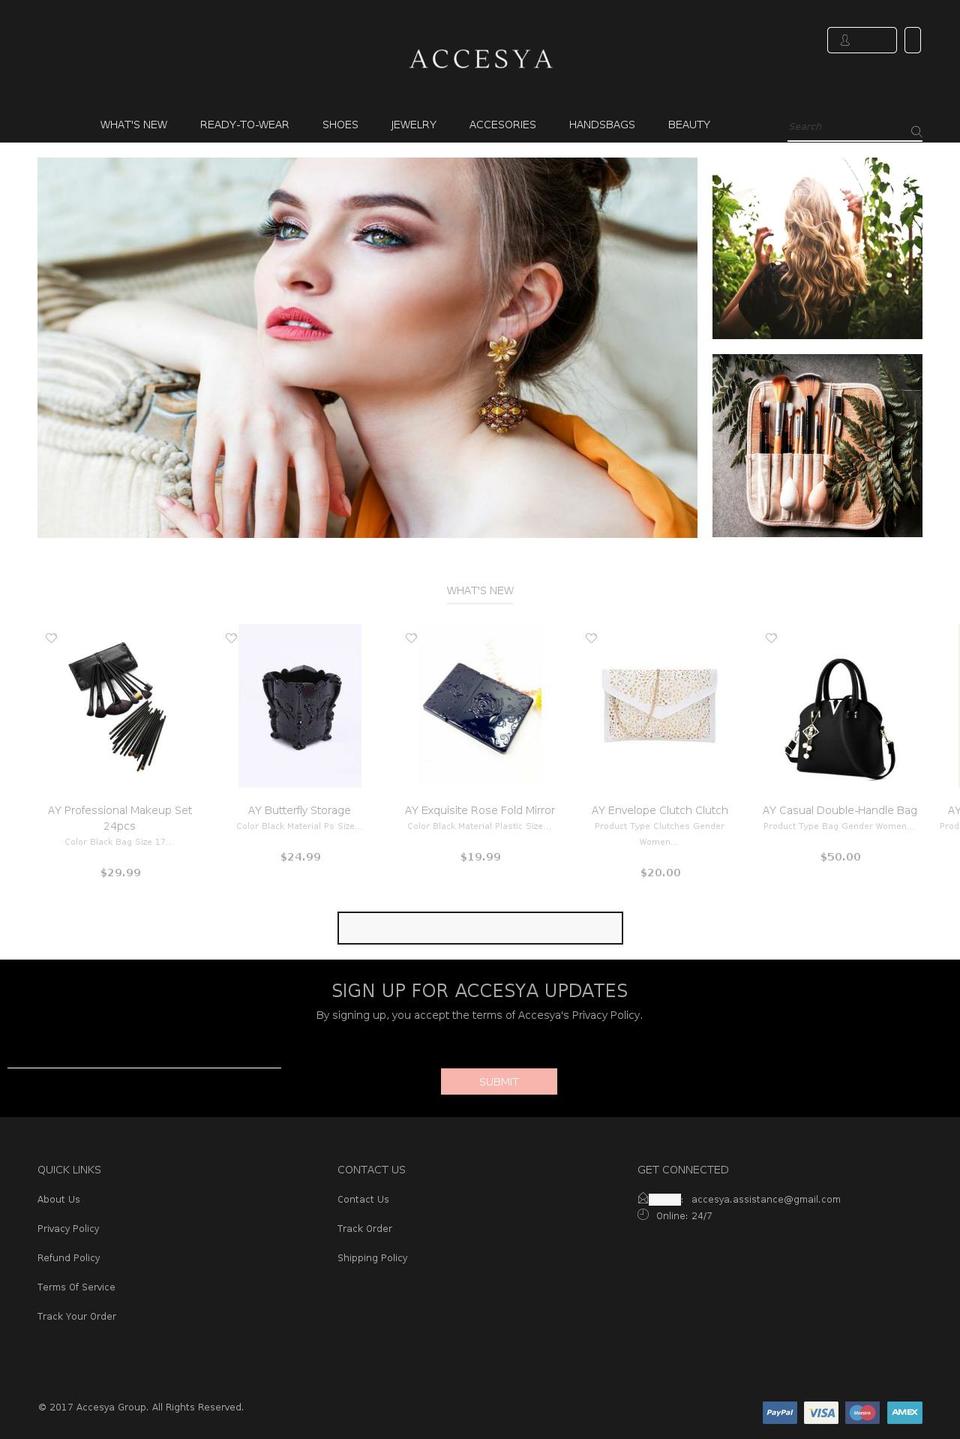 fastest-accessories-v1-1-9 Shopify theme site example accesya.com